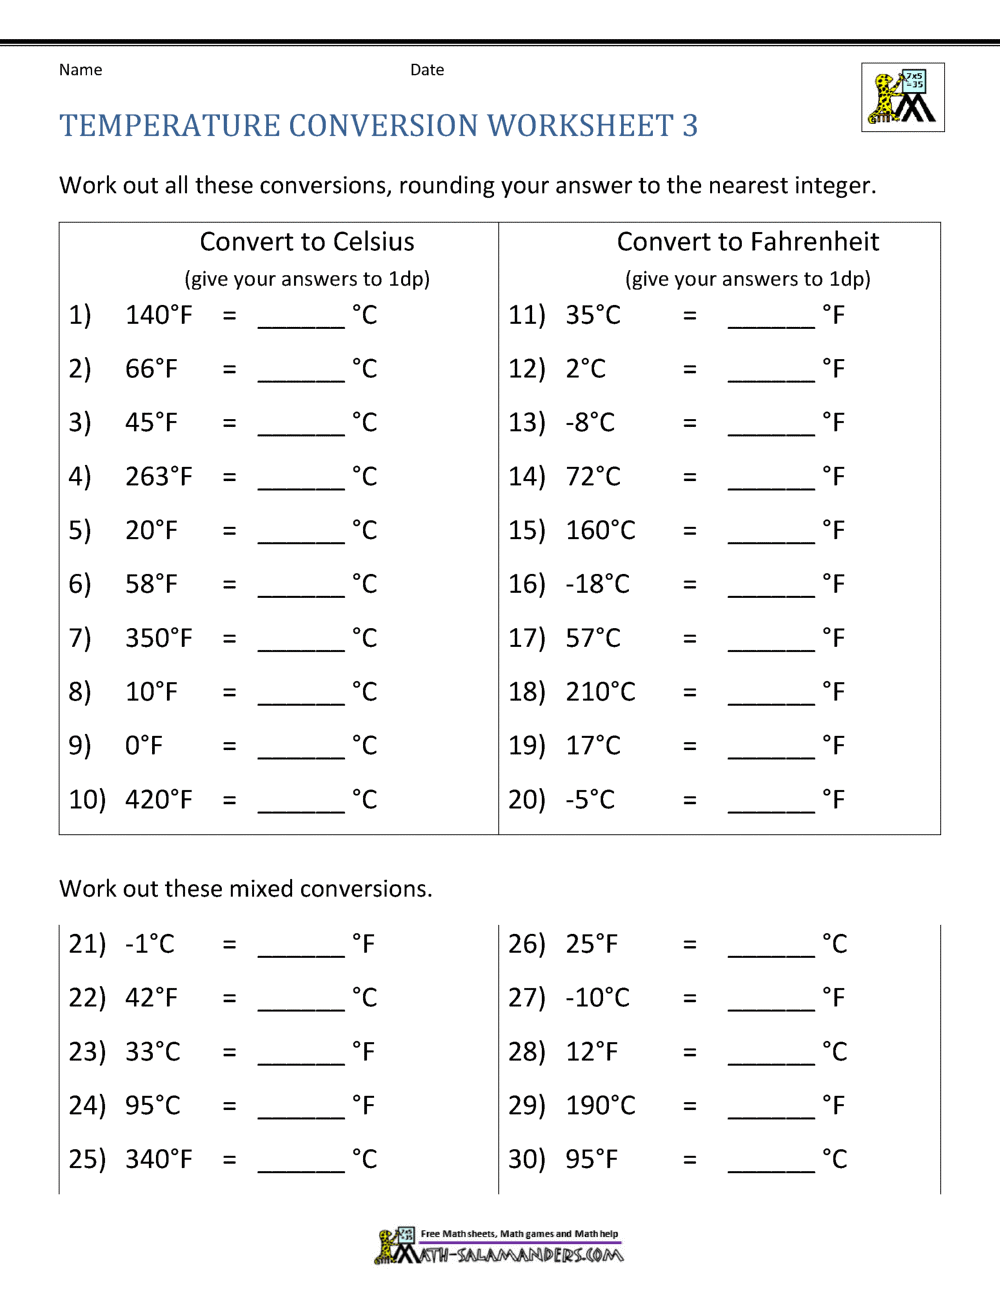 Temperature Conversion Worksheet For Unit Conversion Worksheet Answers